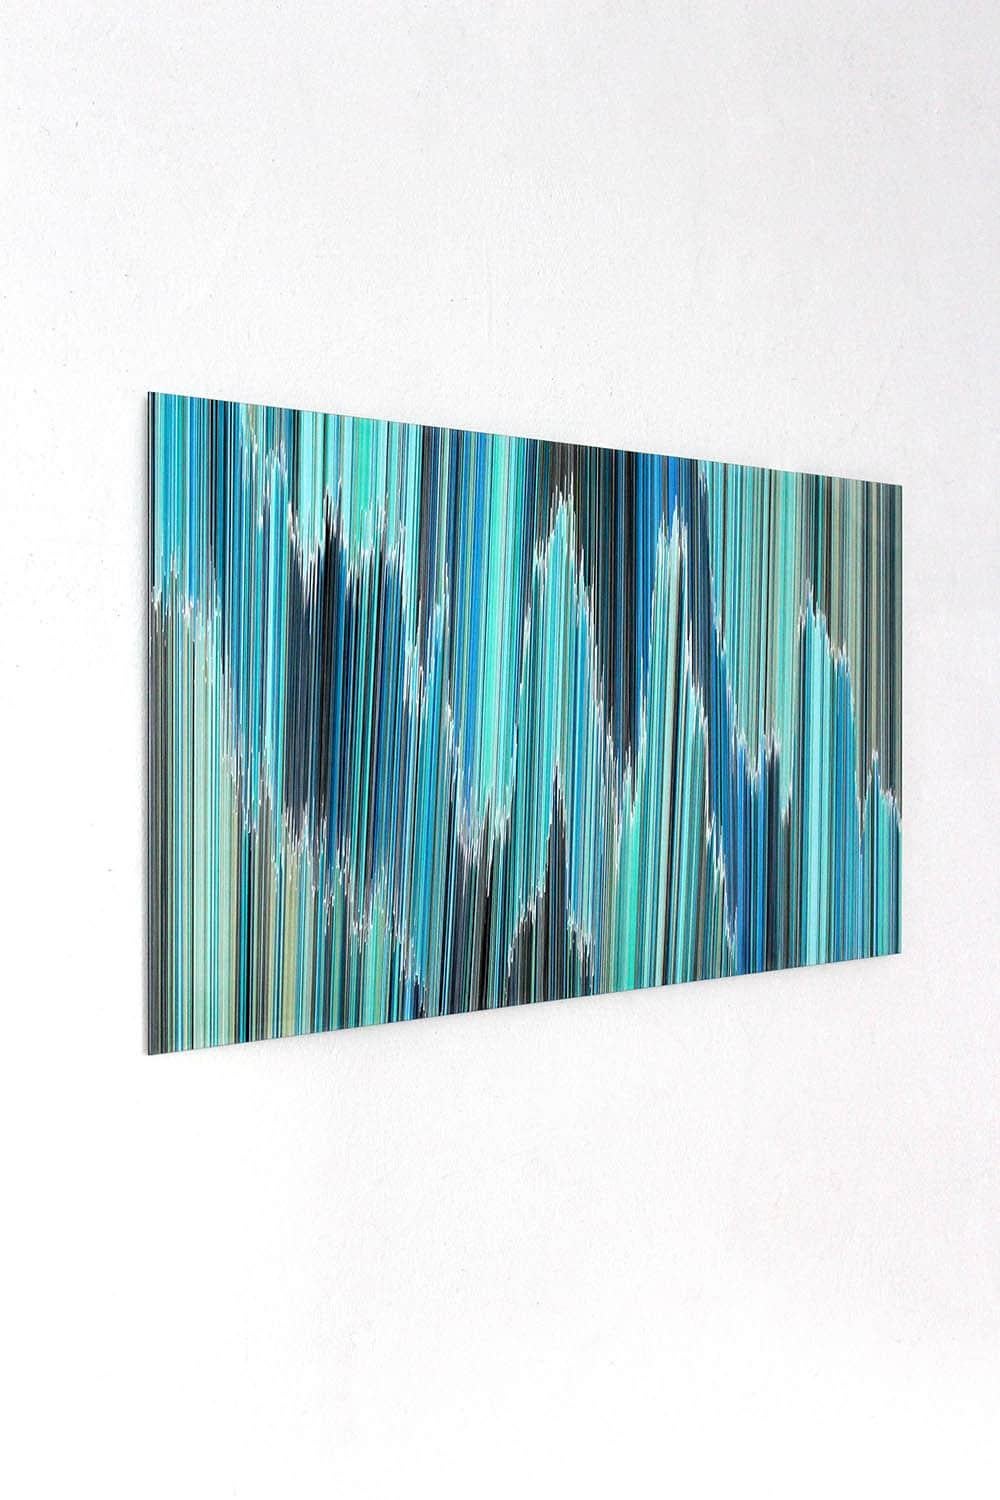 BL-AD No.18 by Doris Marten - Contemporary abstract painting, blue lines For Sale 3